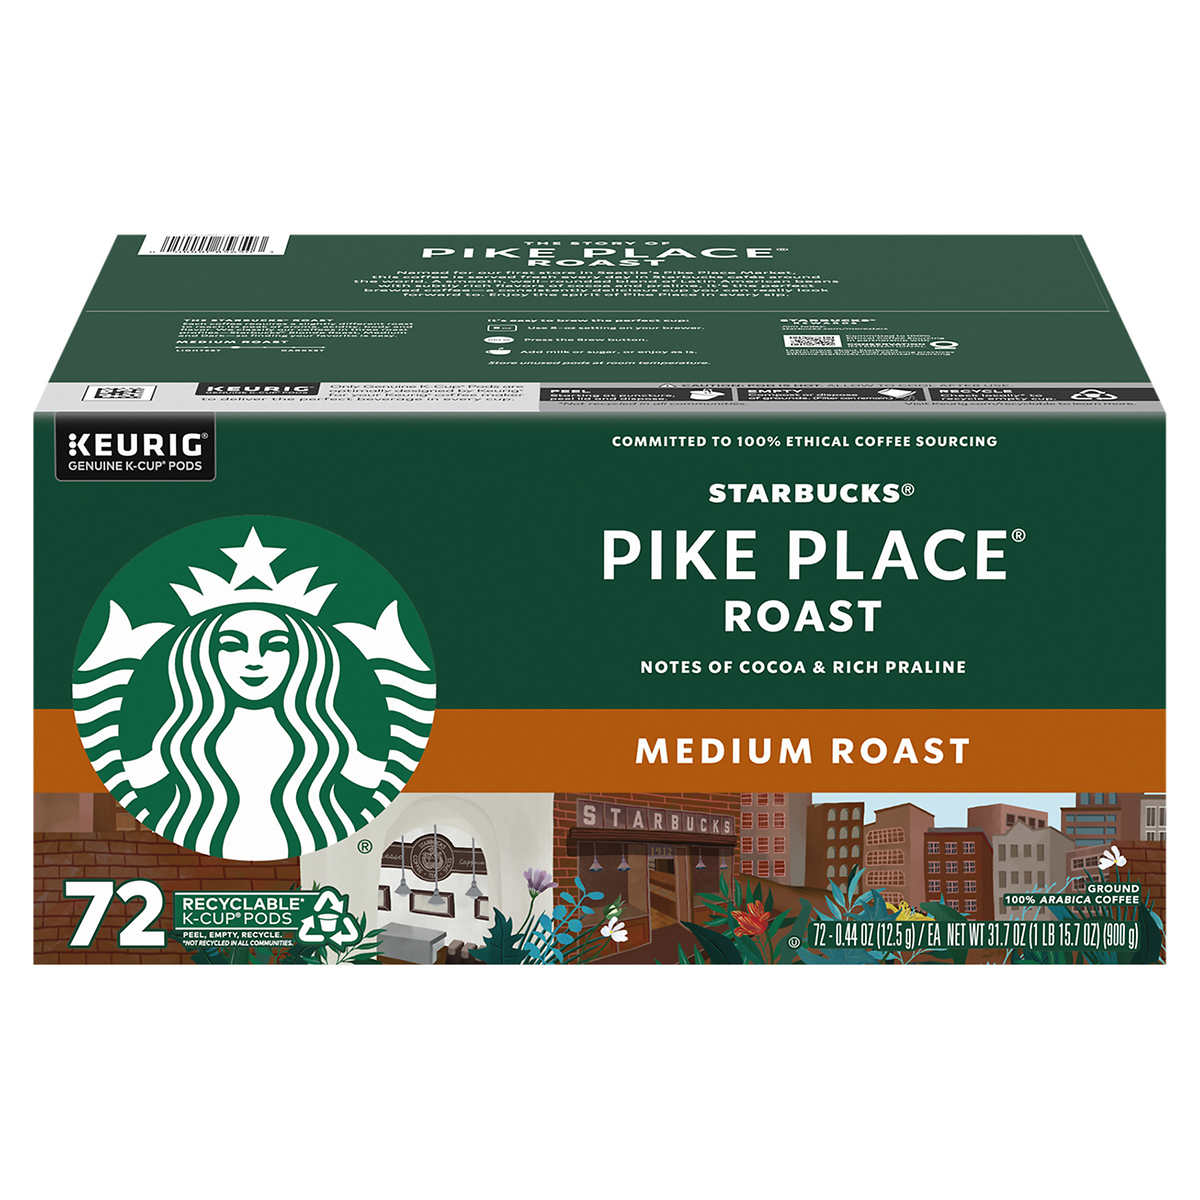 Starbuck Tumbler Gift Set (2-Pack at Costco! Such a great gift idea fo